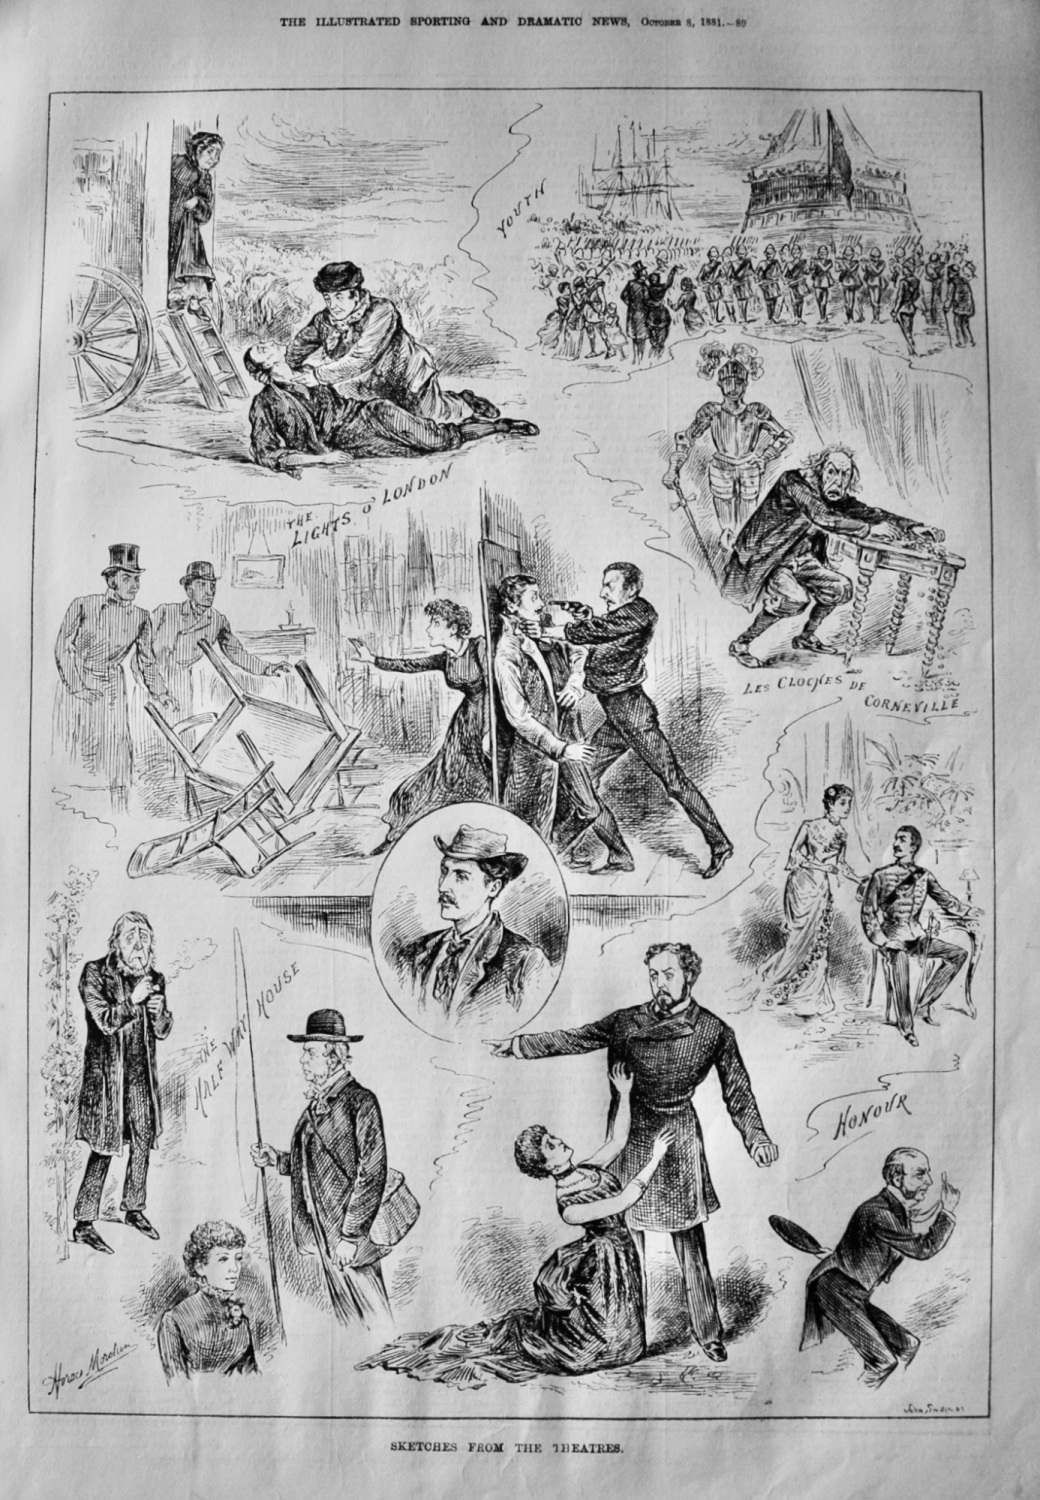 Sketches from the Theatres.  1881.